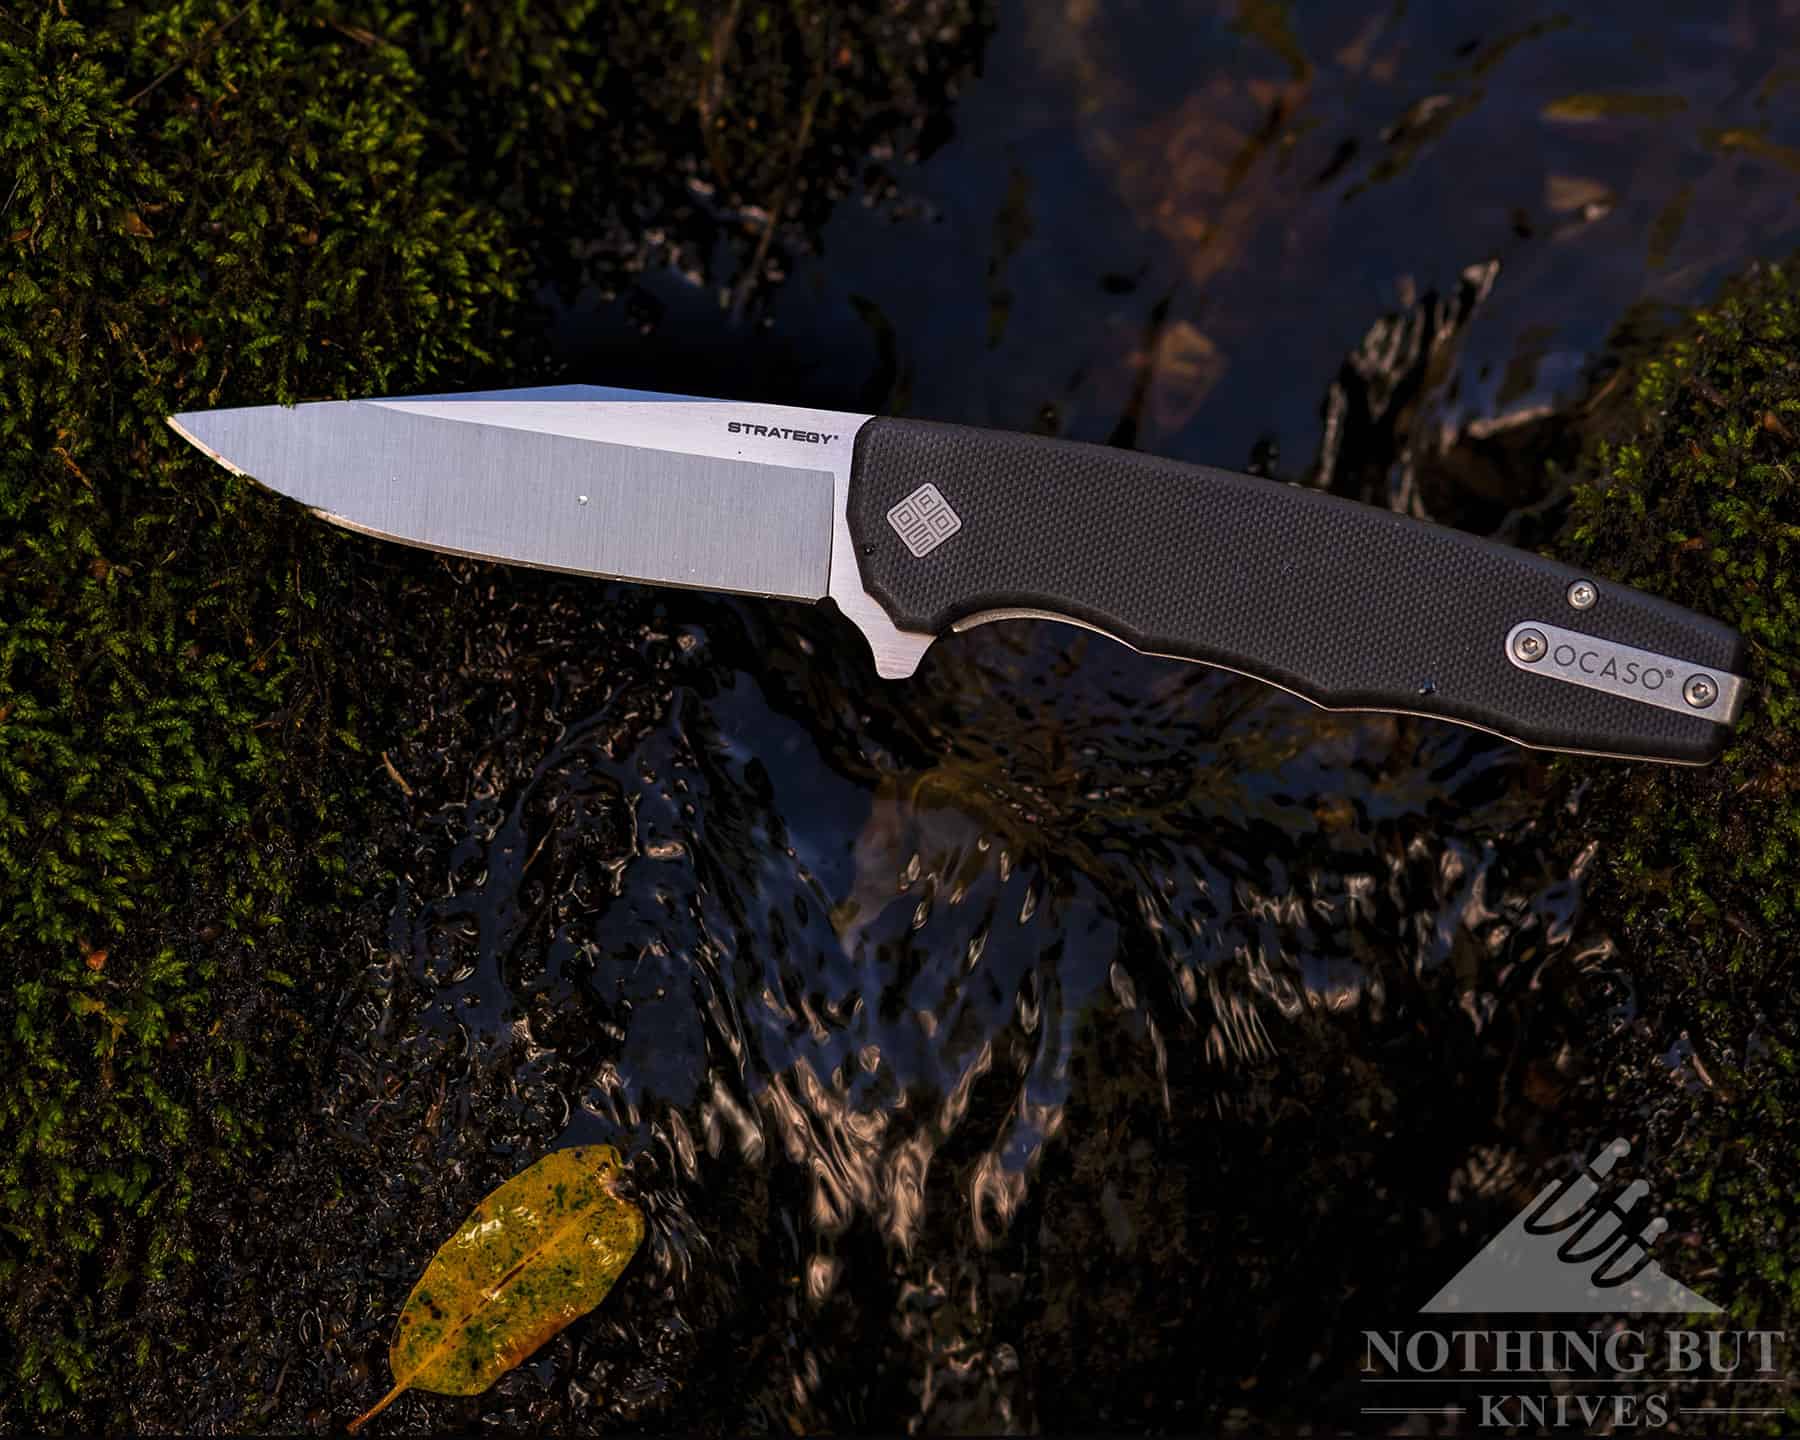 The Strategy is available with aluminum, G10 or carbon fiber (pictured here) handle scales.